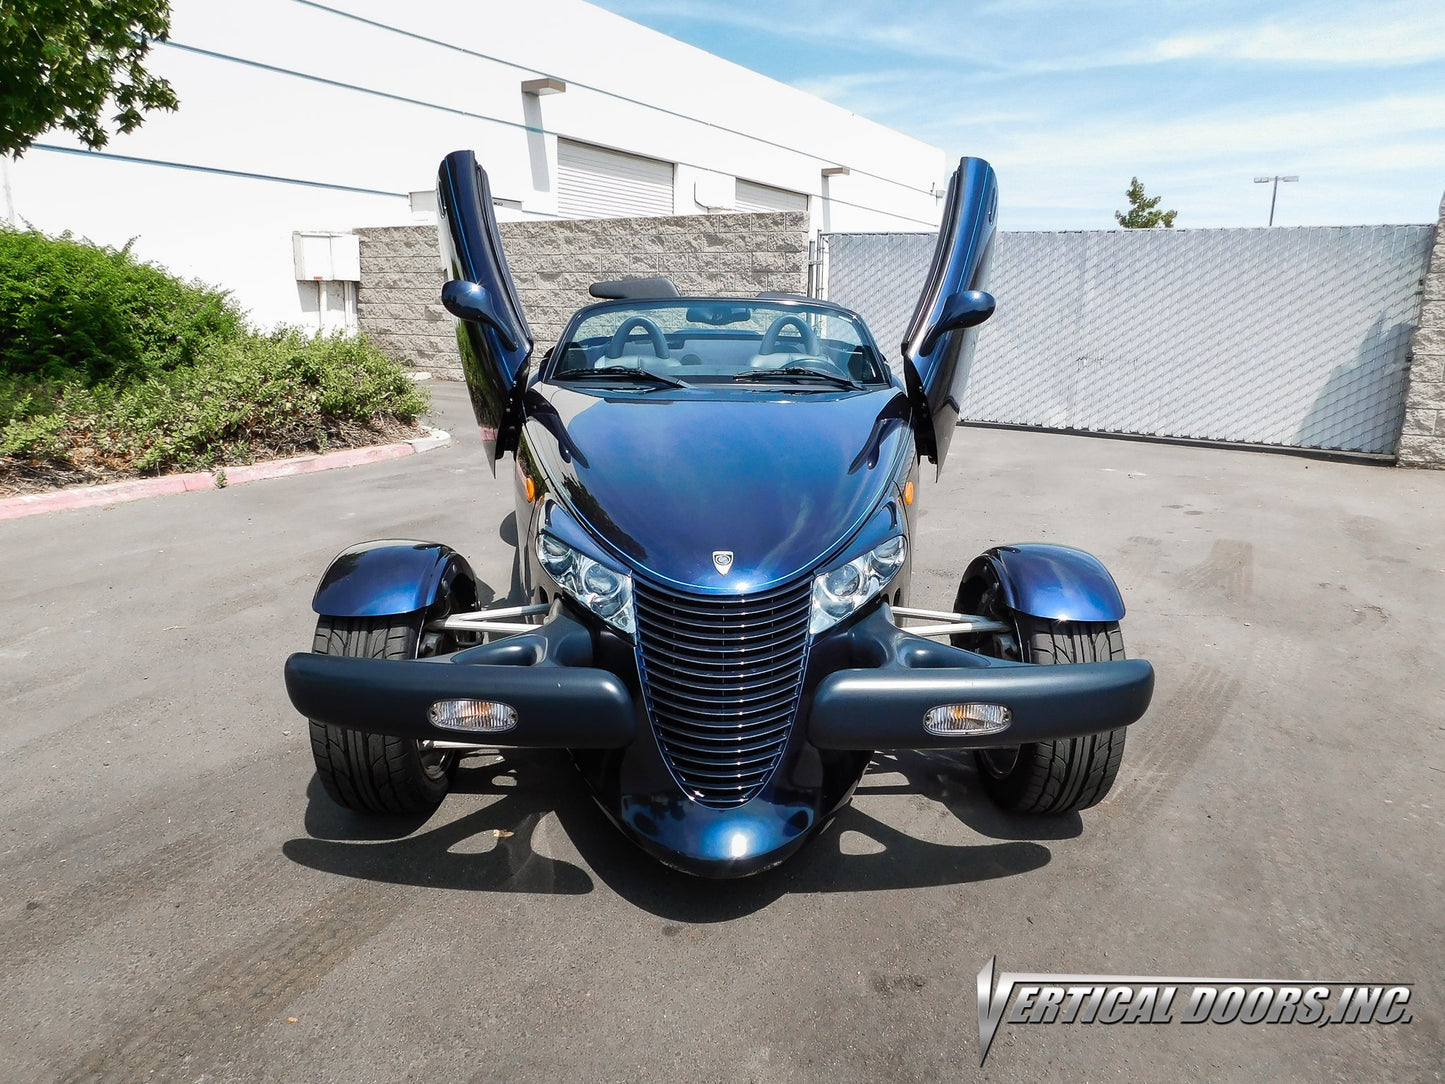 Vertical doors kit compatible Plymouth Prowler 1997-2002